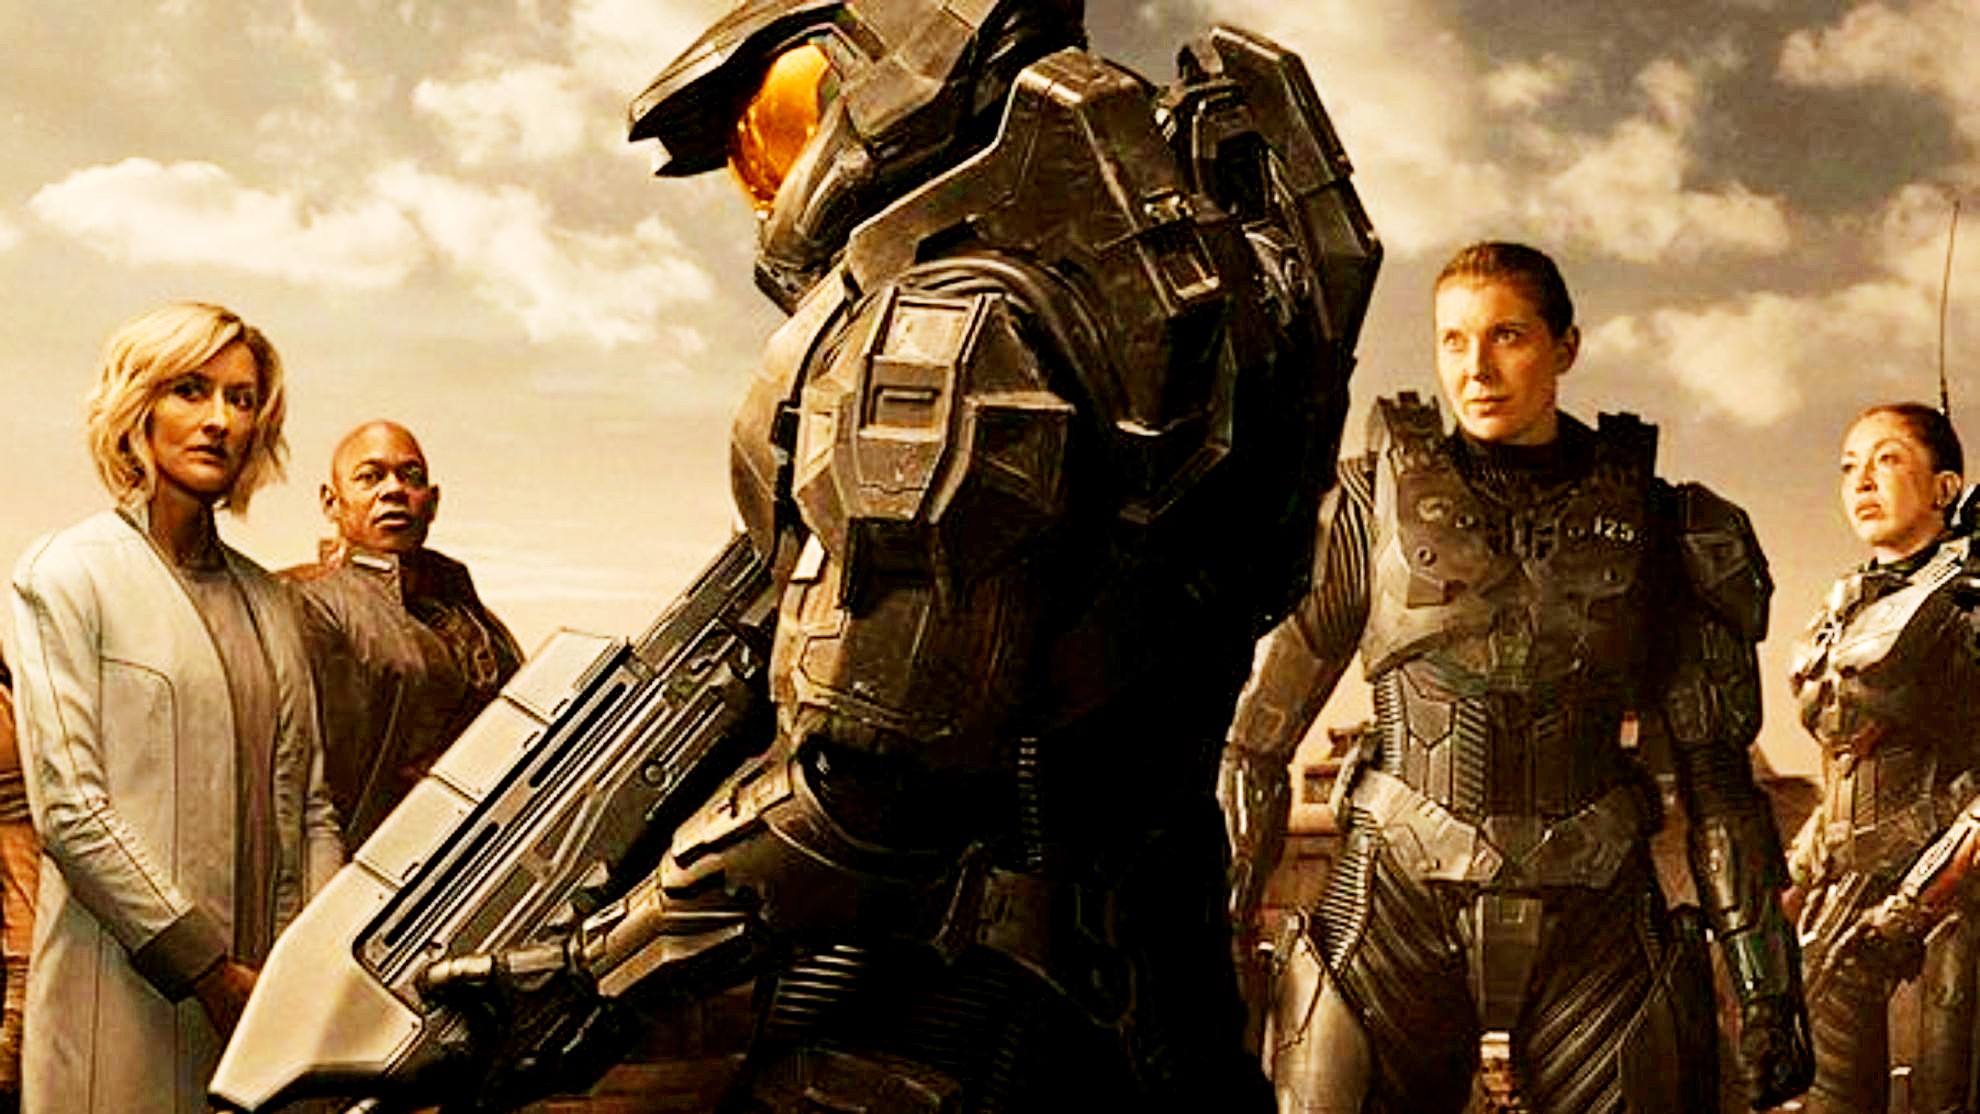 Halo' Season 2 Trailer Sees Return of Master Chief In Epic Battle